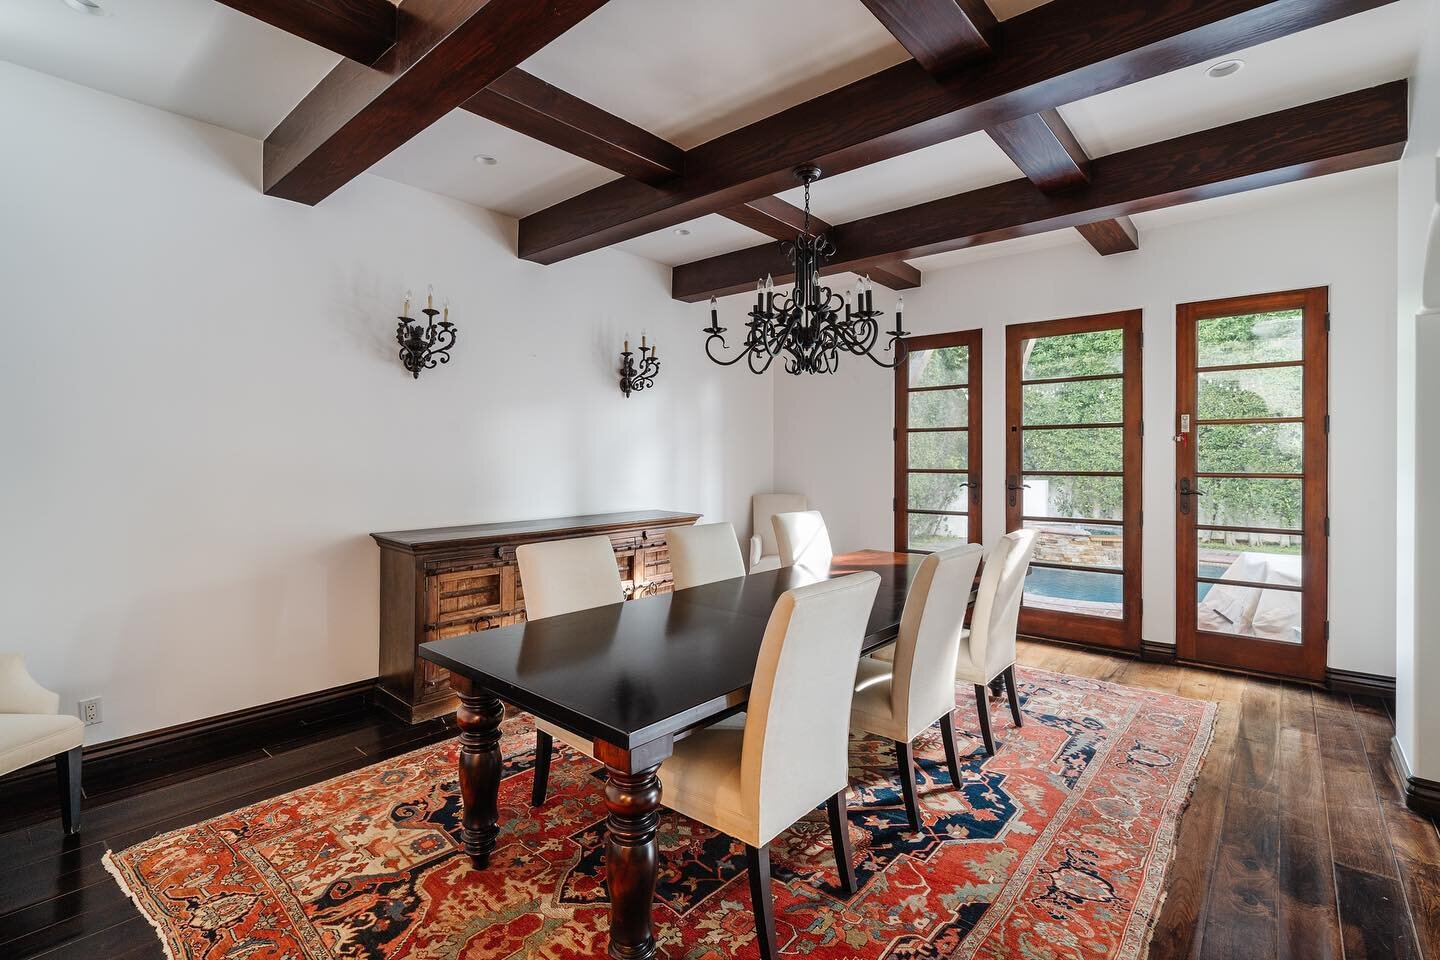 NEW PRICE | 6620 Lindenhurst Ave, Los Angeles 90048 | 4 bedroom, 4 bath luxury Spanish home in Beverly Grove! Soaring beamed ceilings, dark wood floors, and French doors that lead out to a sparking pool and spa! High end finishes throughout! Near the